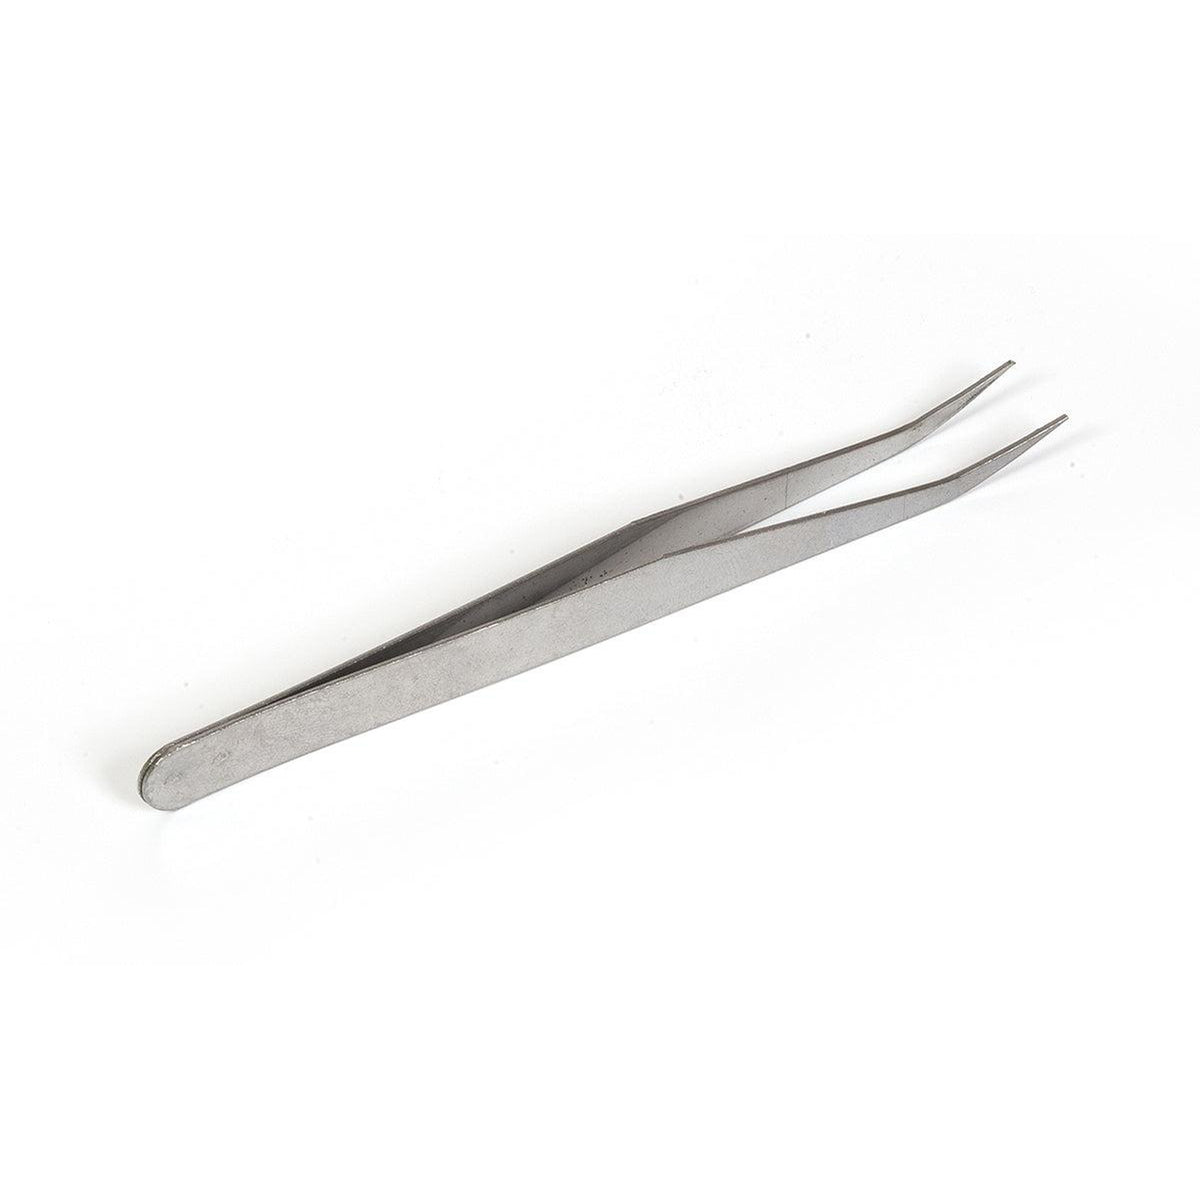 Precision special model tweezers(straight) – Colle 21